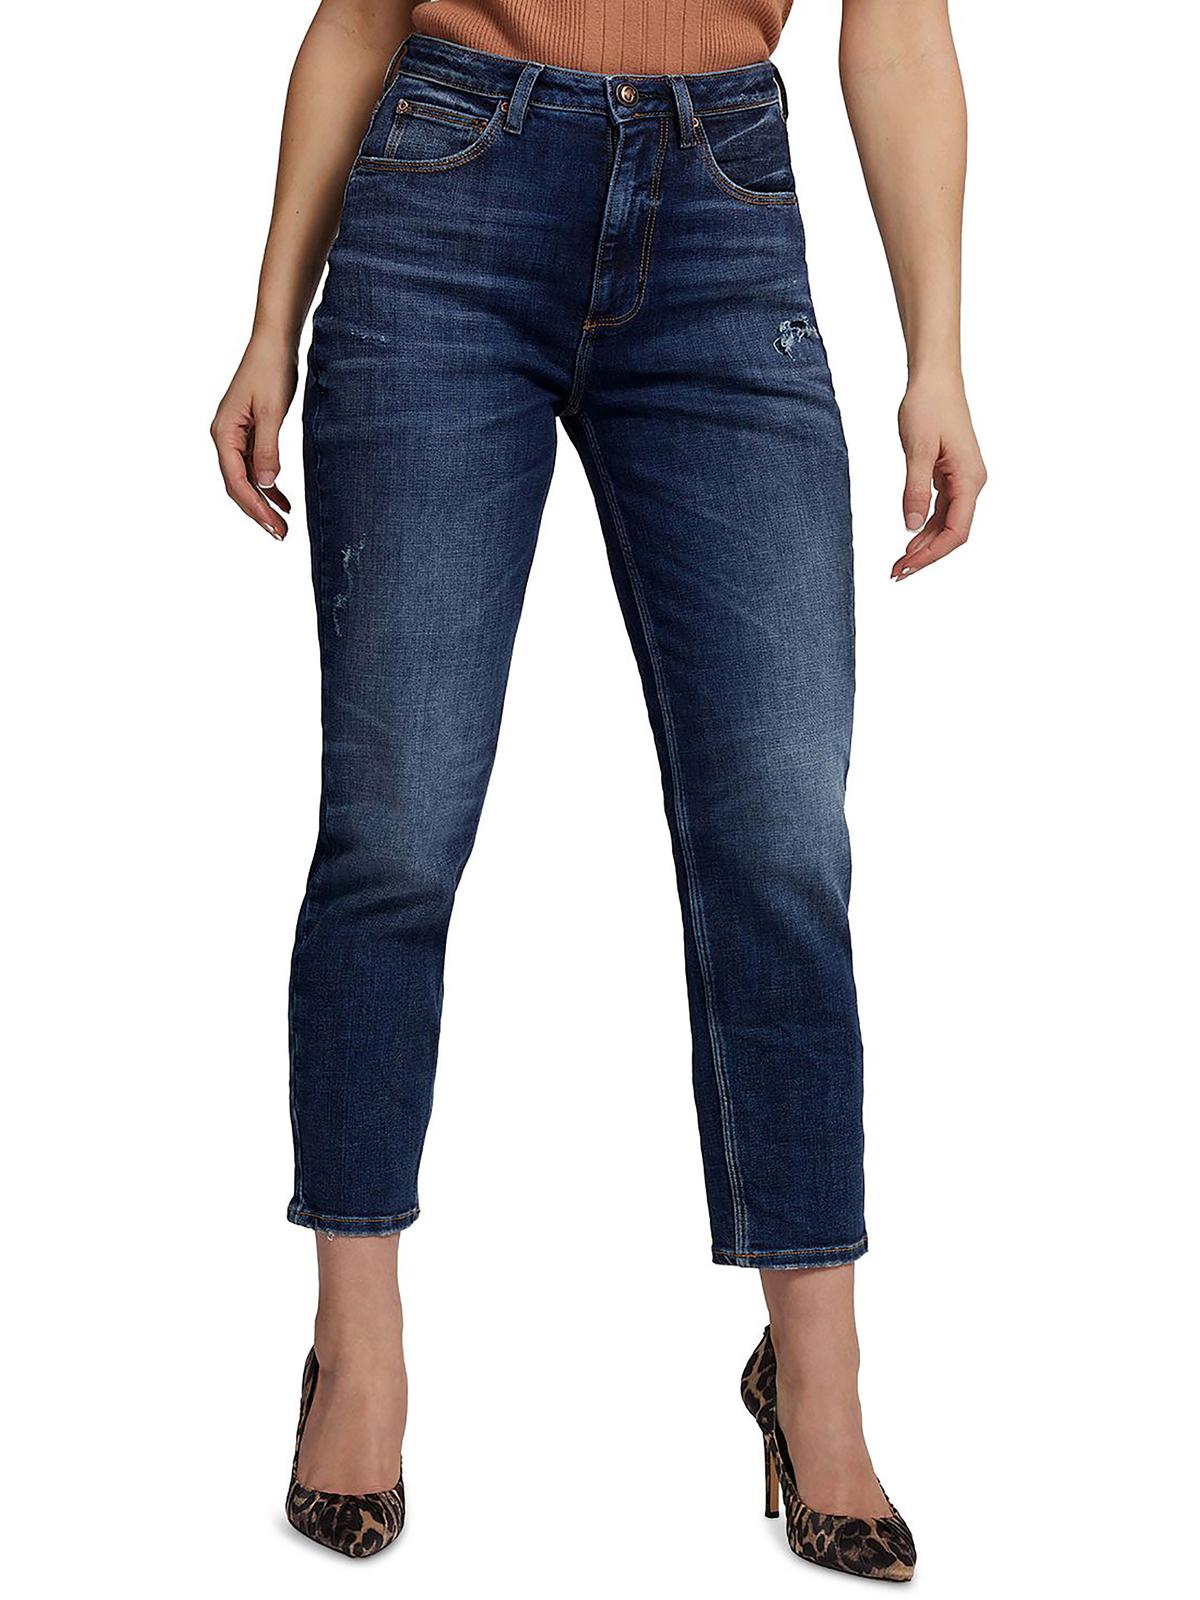 GUESS Womens Denim Ankle Mom Jeans